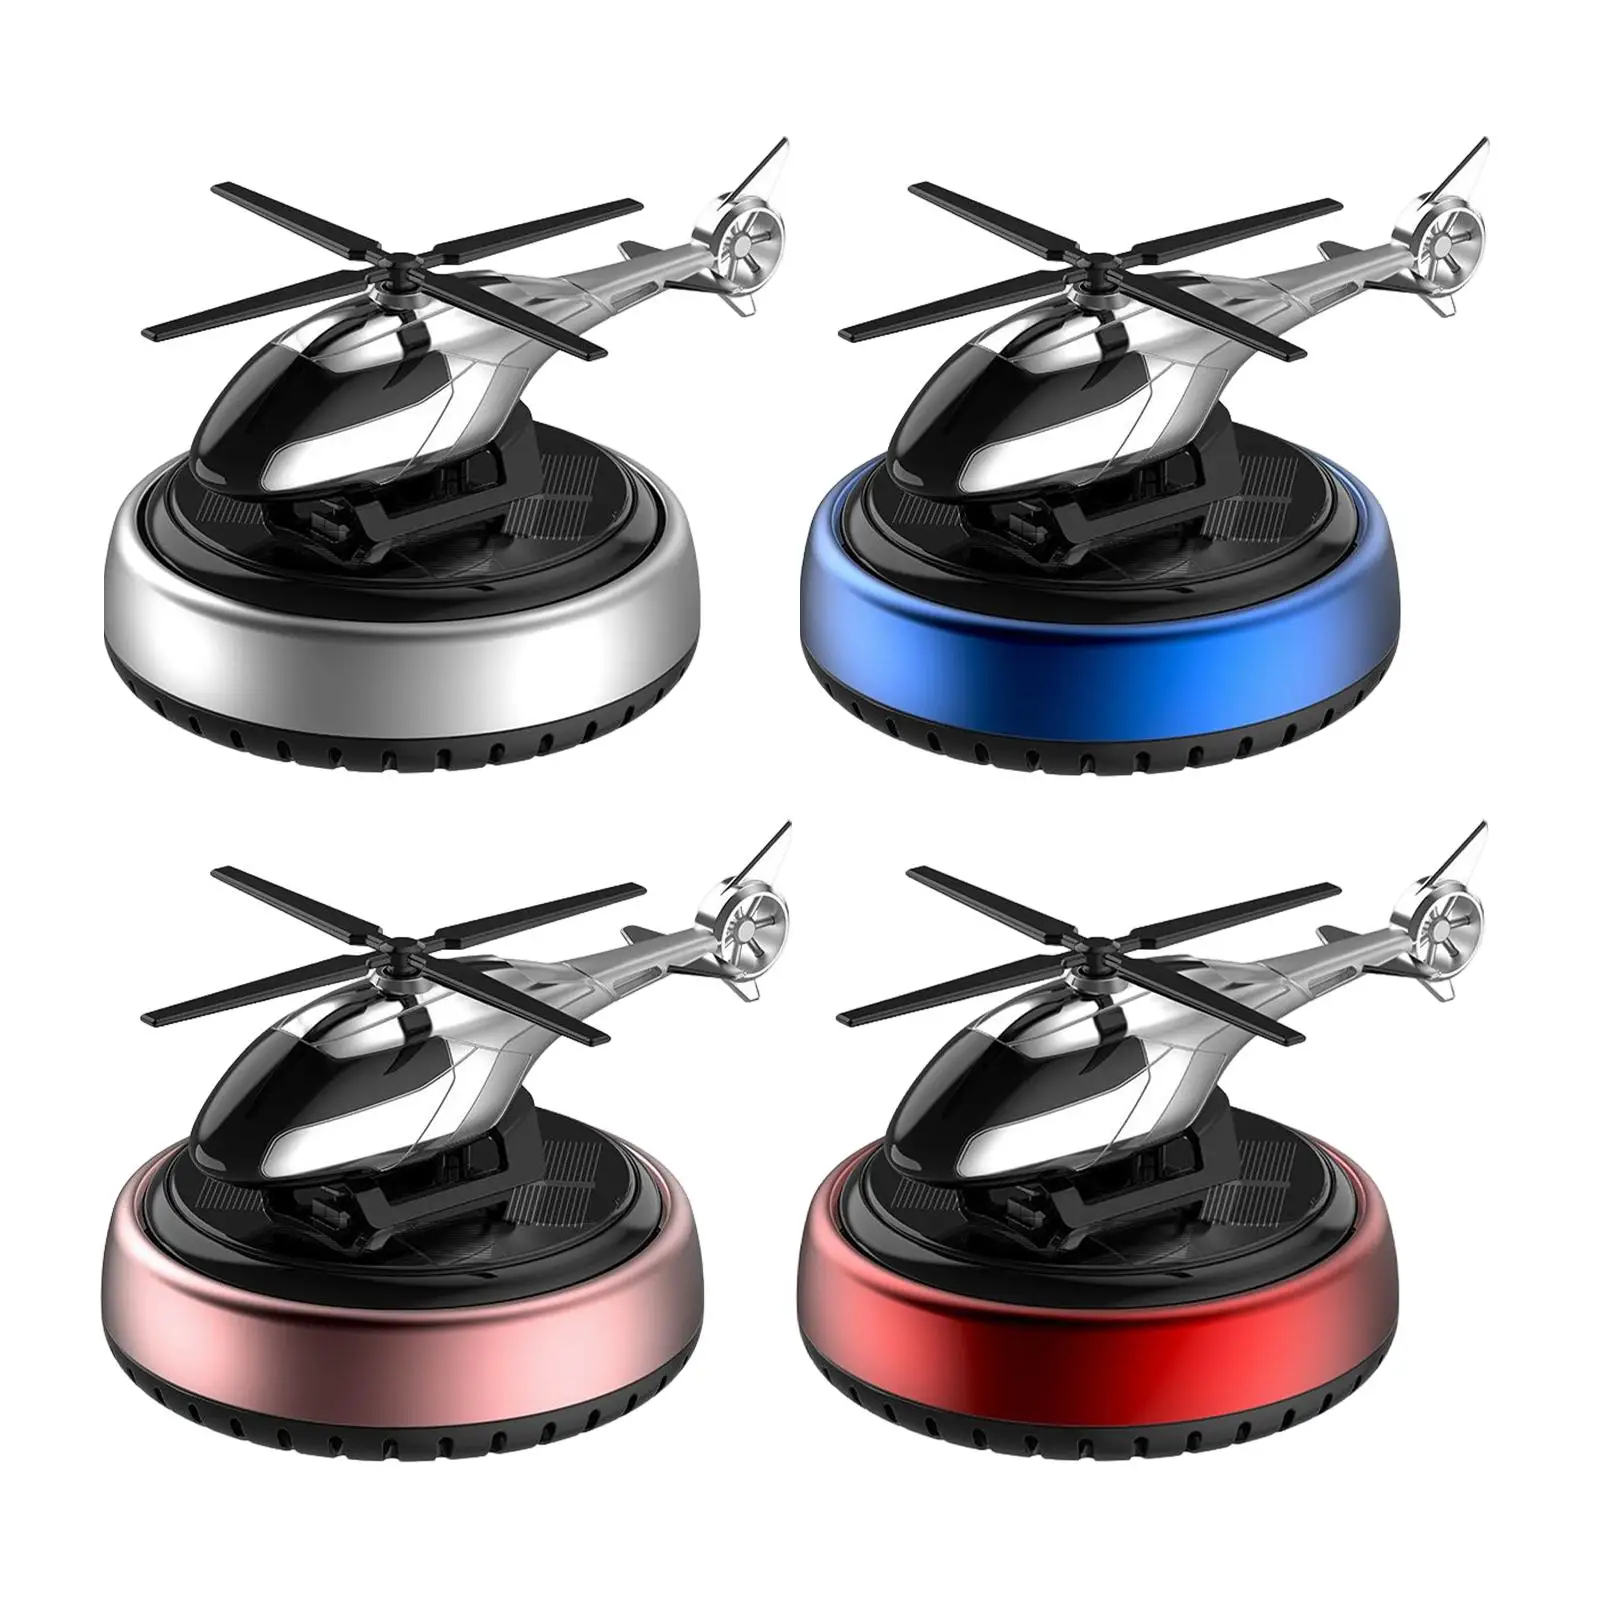 Solar Powered Air Freshener  Perfume Ornaments Diffuser  Model Helicopter  Air  for Holder Decor